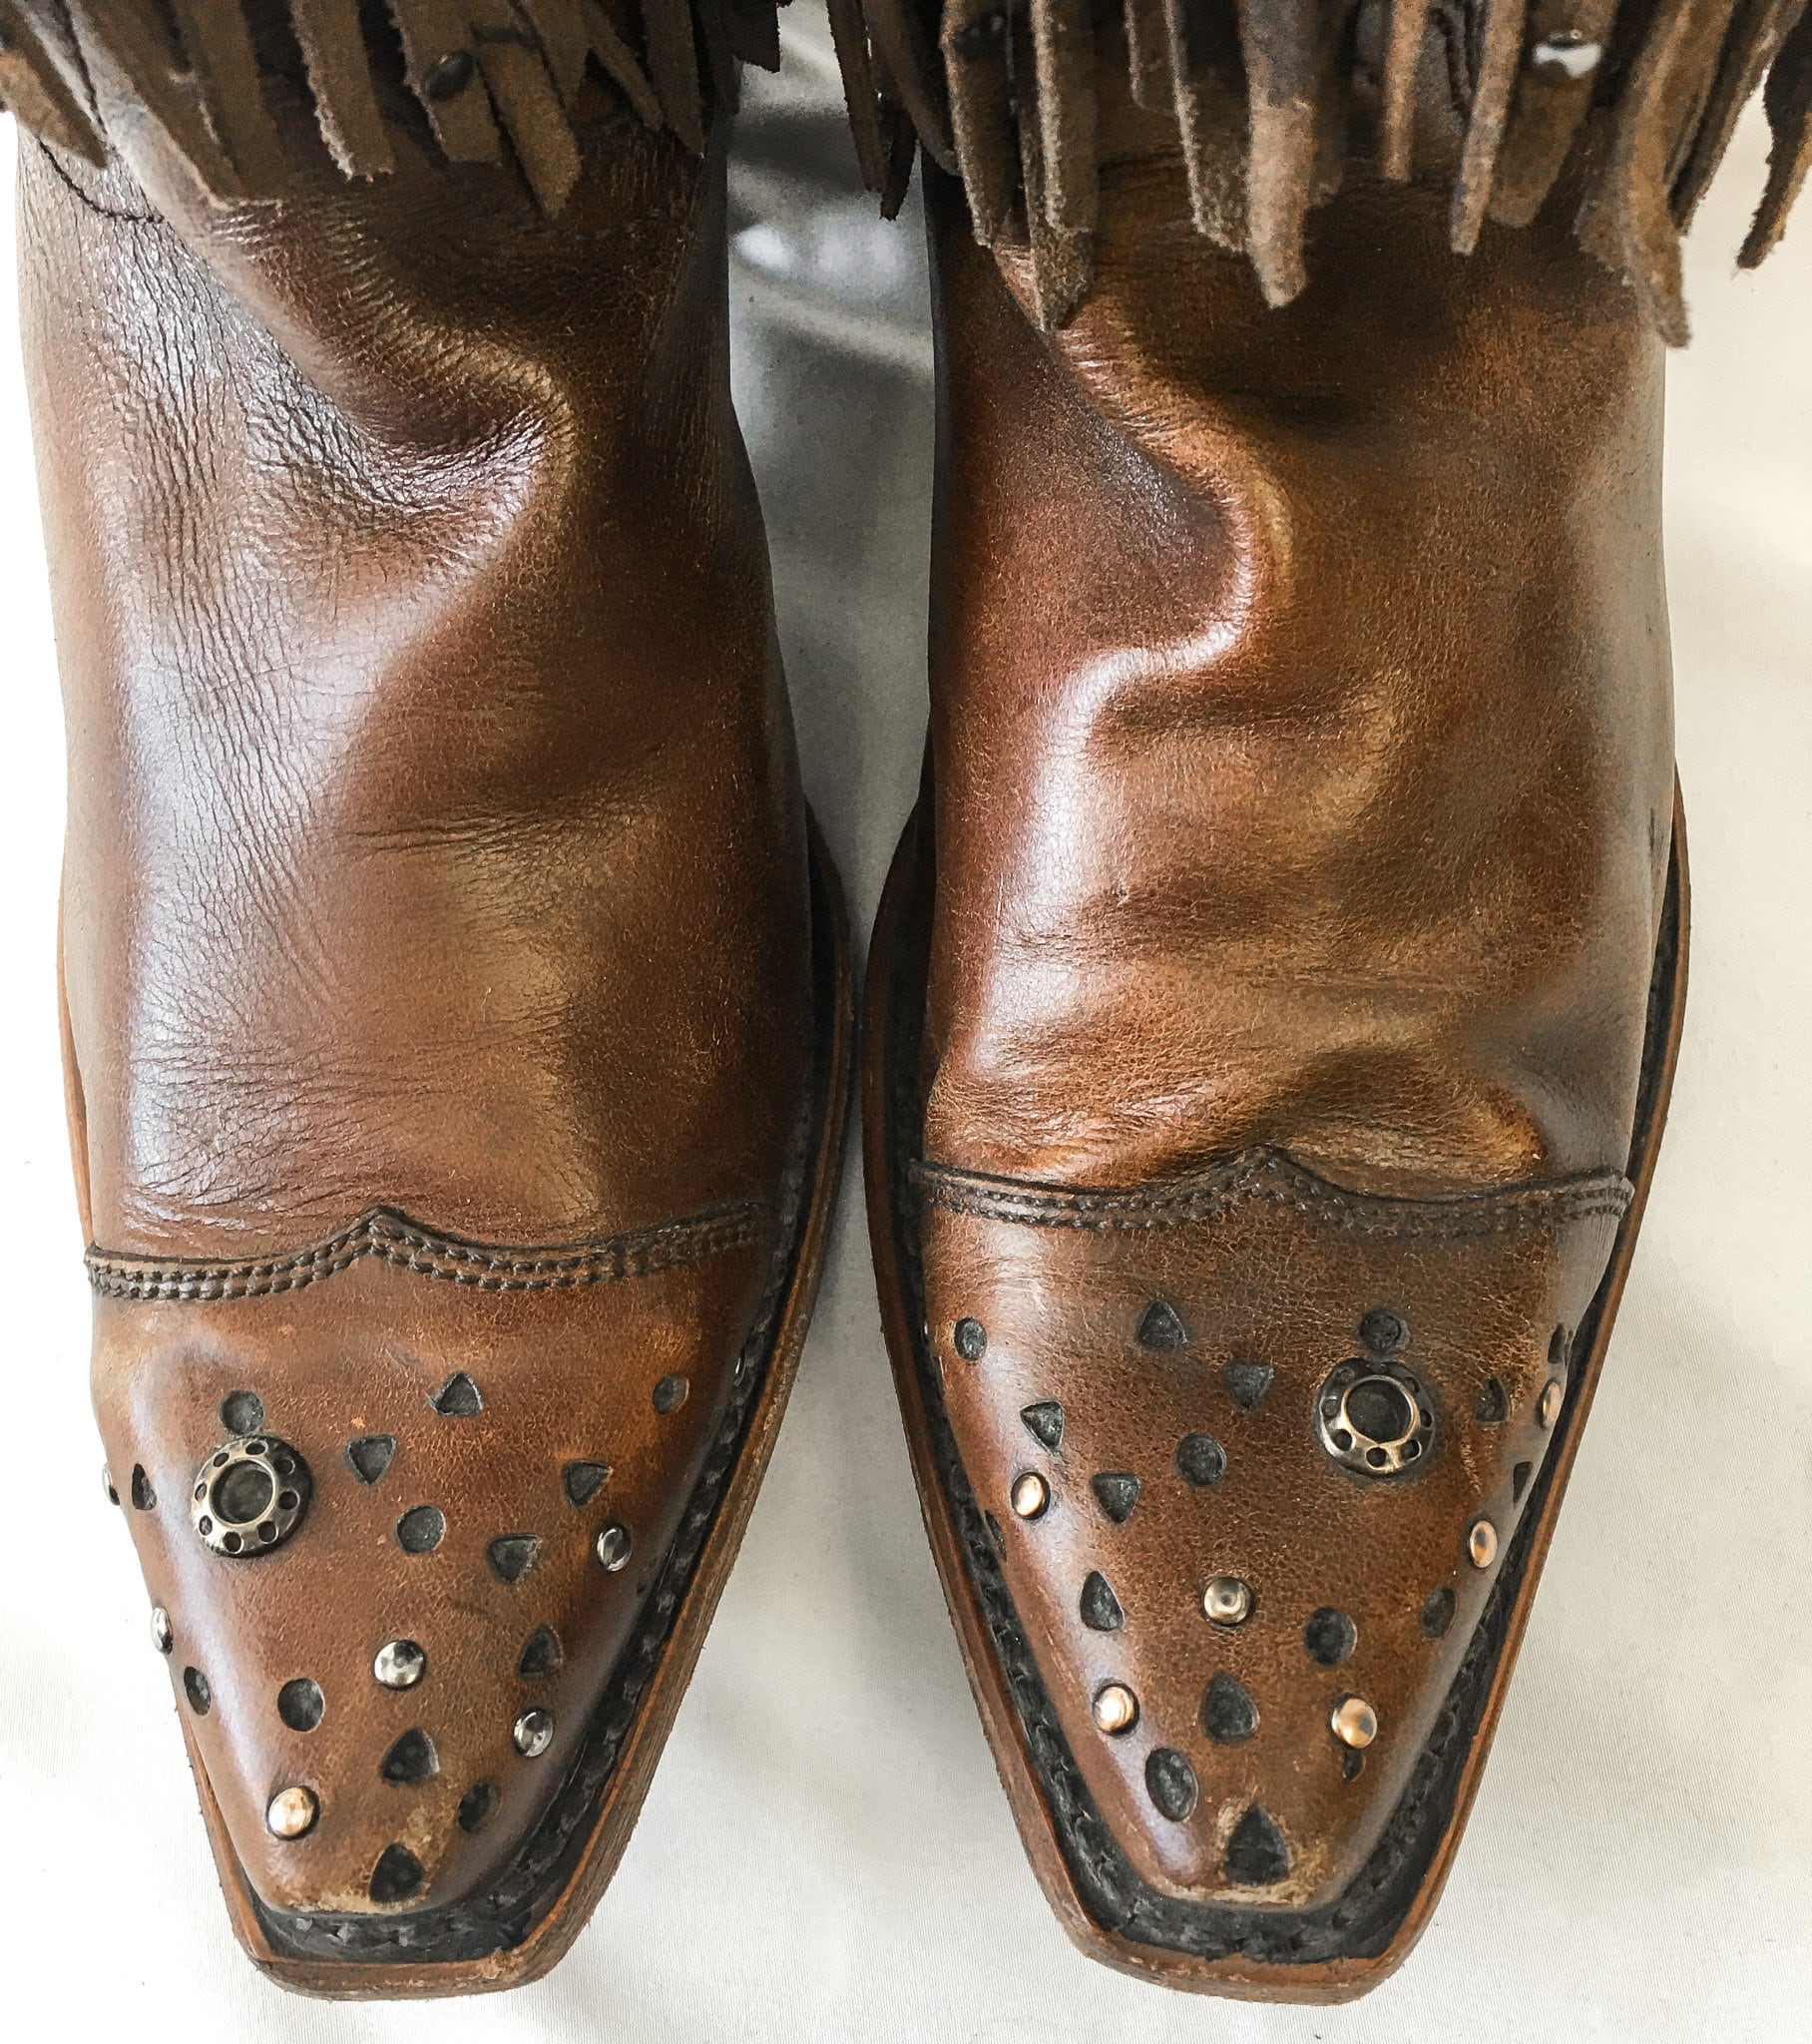 Vintage Inspired Corral Sierra Brown Fringe and Studs Snip Toe Leather Cowboy Boots, Style C1185, Women's Sz. 10M